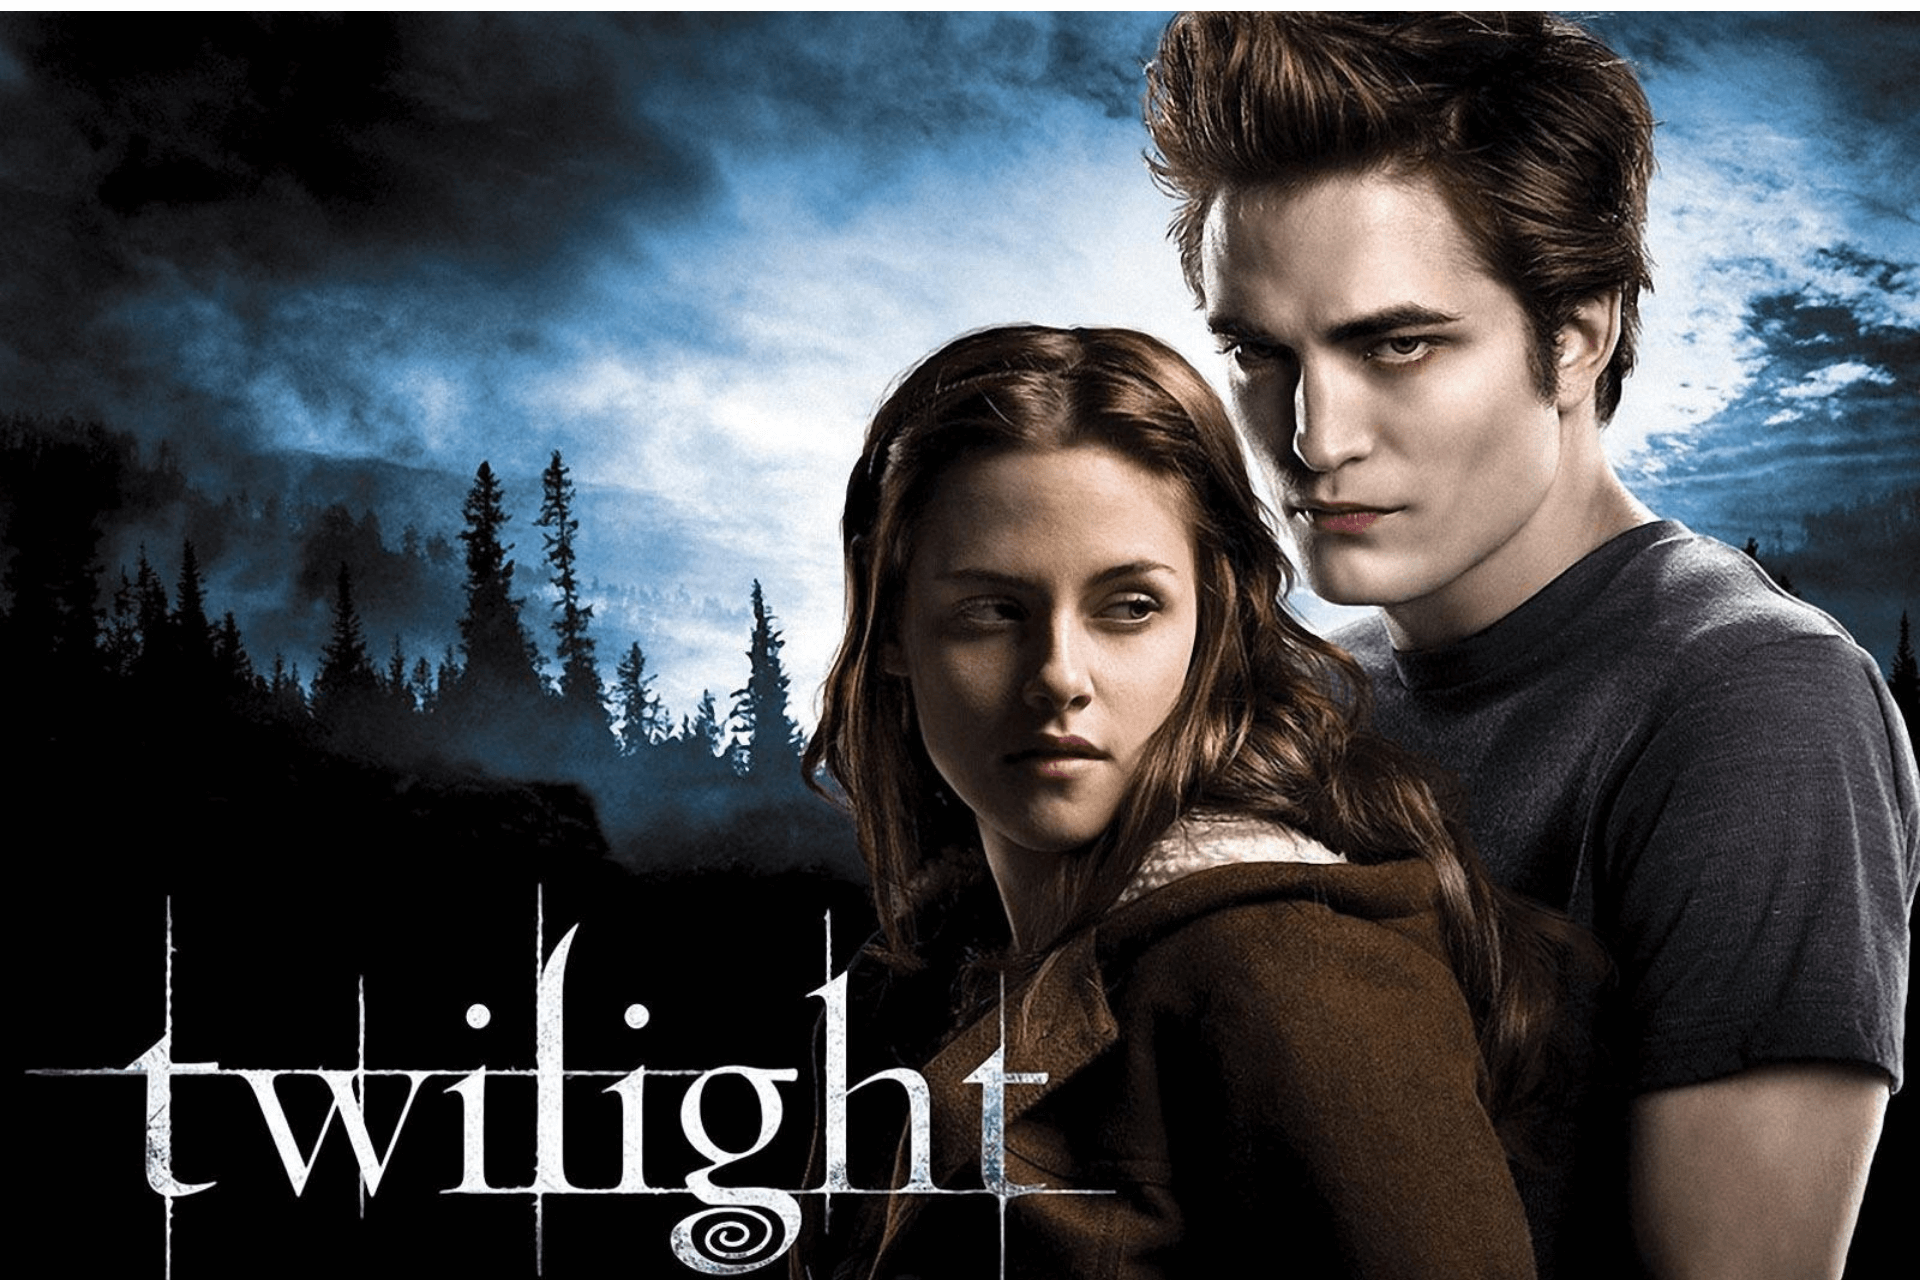 Where to watch Twilight in 2023